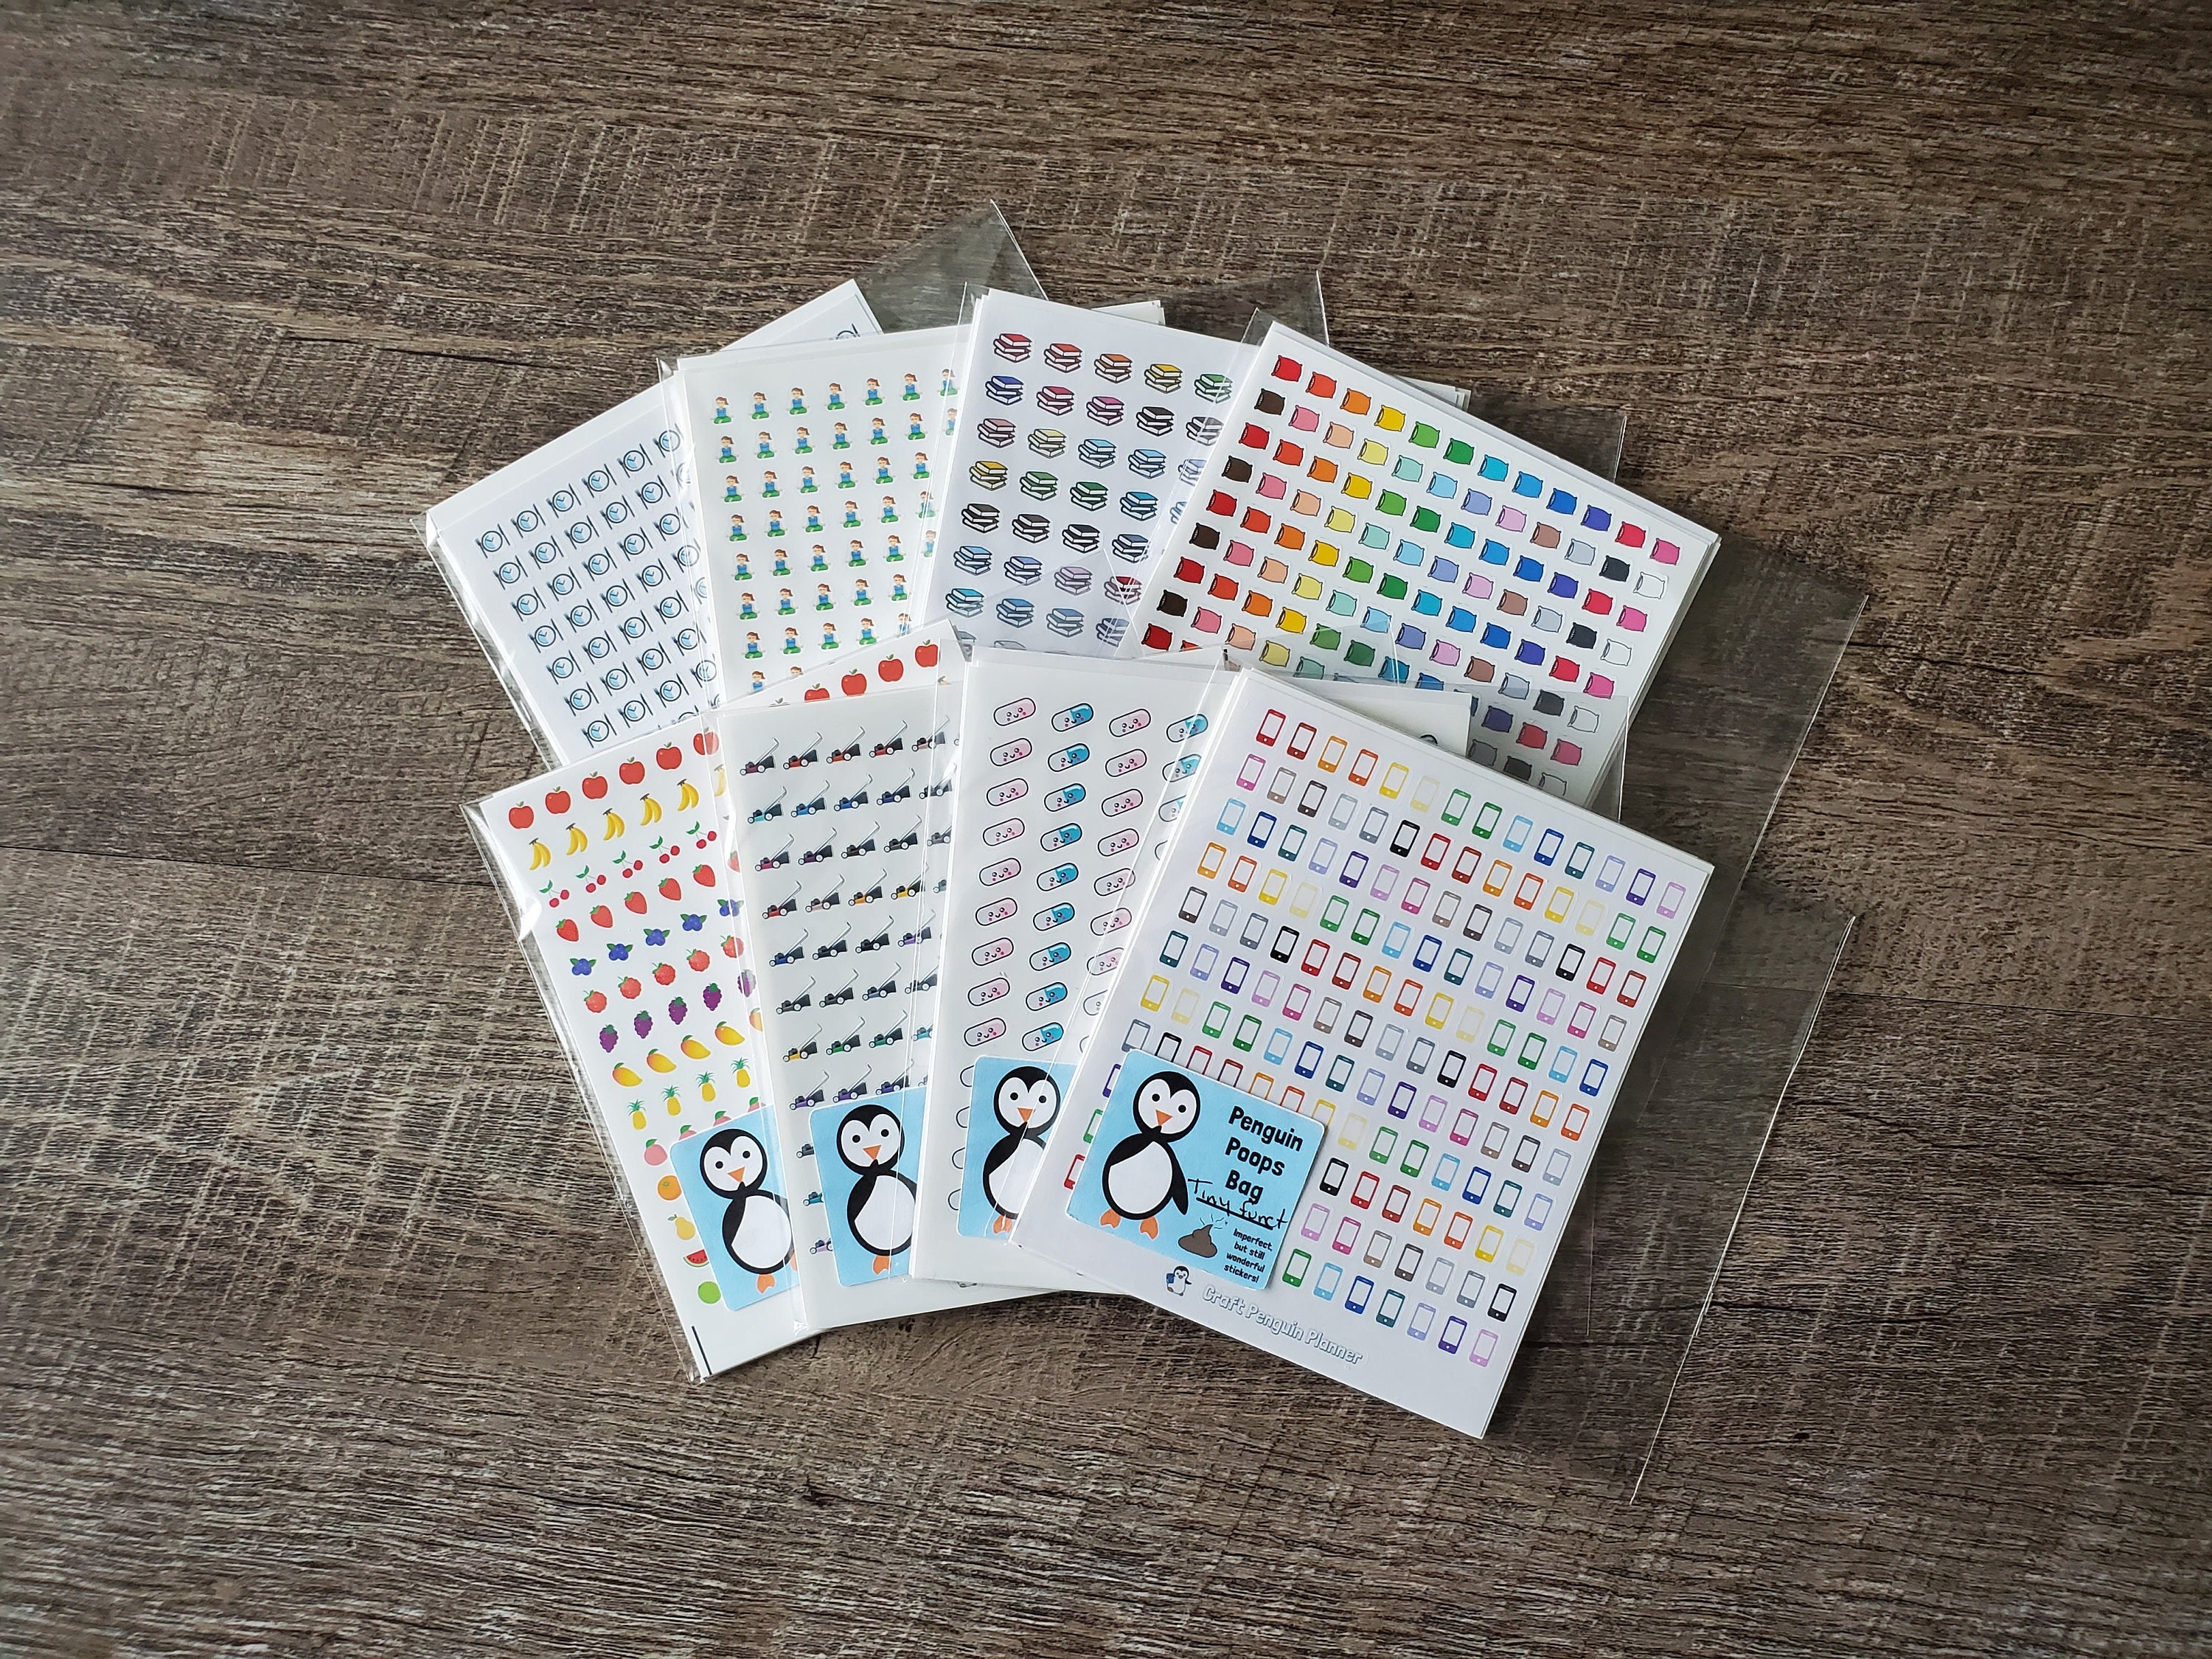 Missing: My Motivation Poster Stickers - Craft Penguin Planner